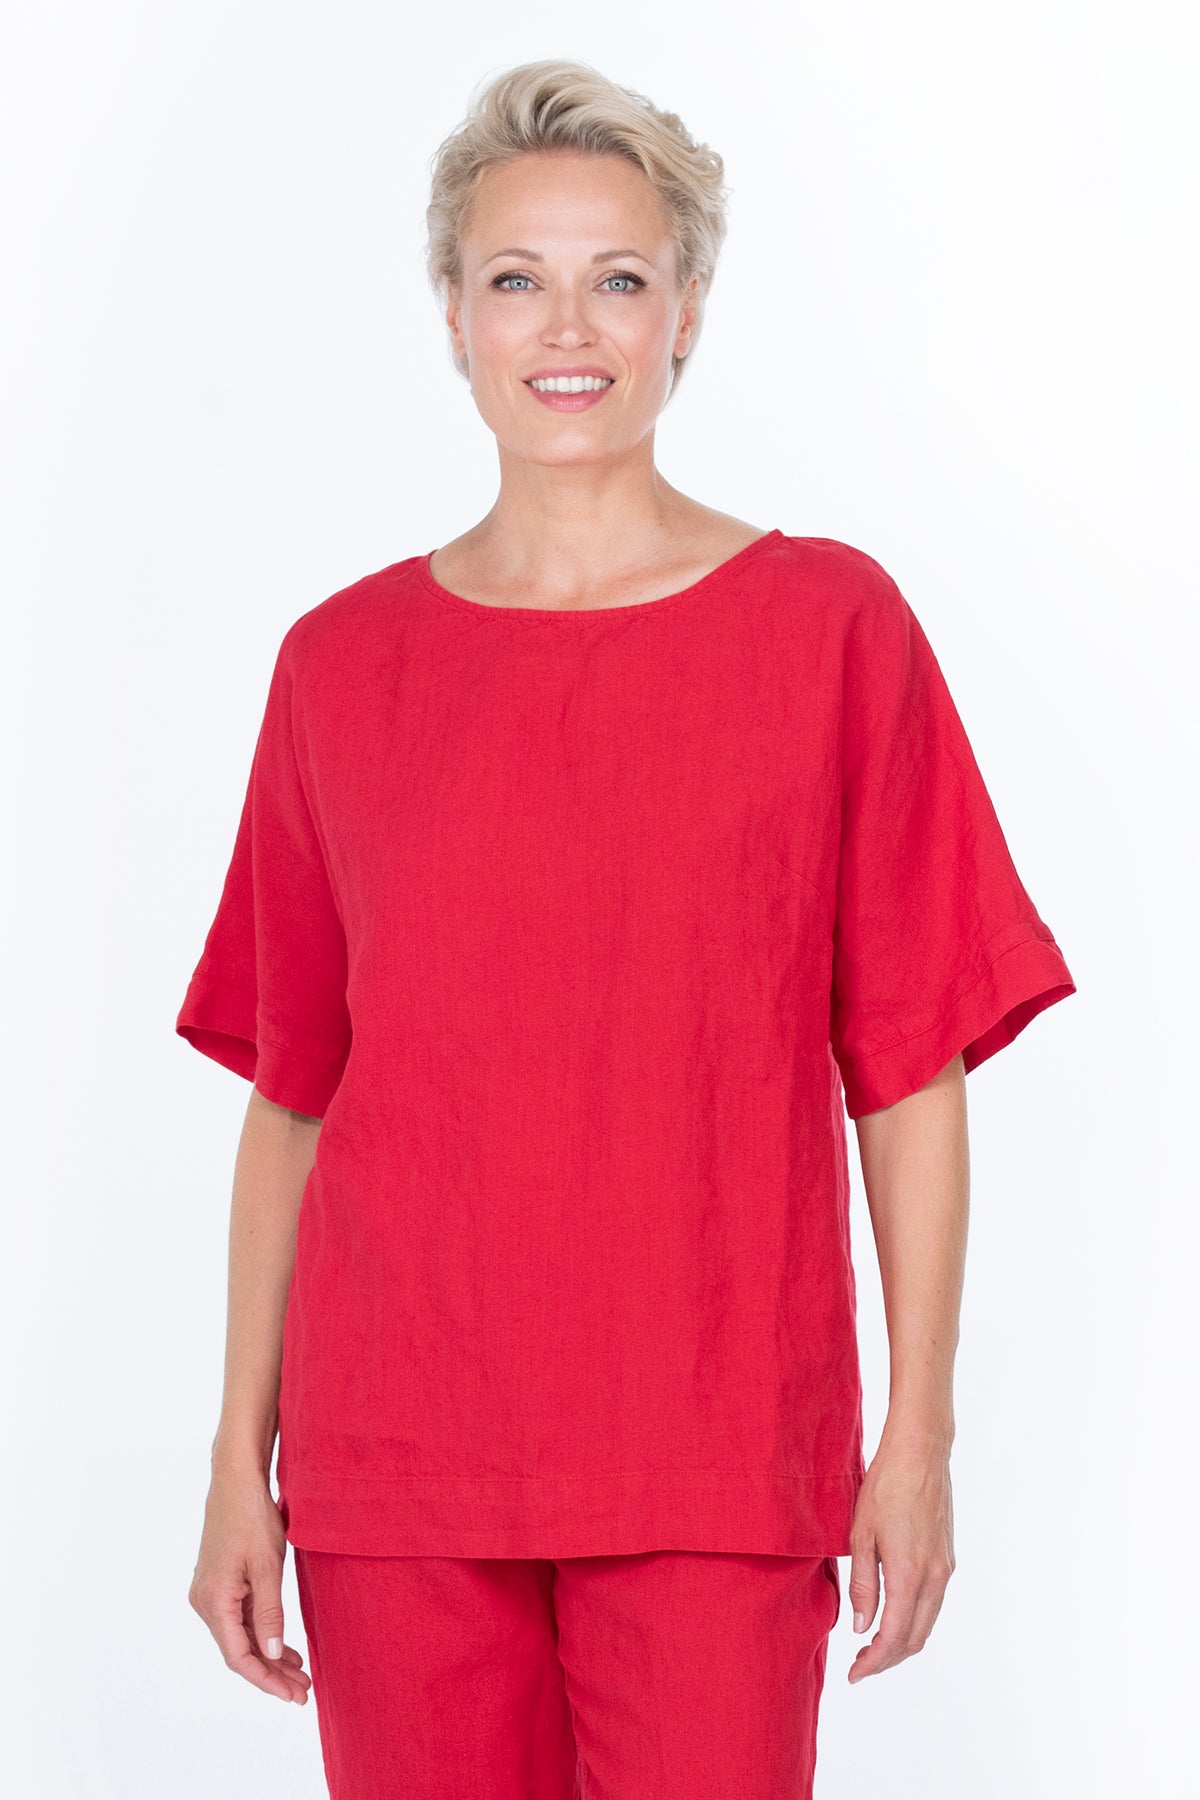 LEYLA top red